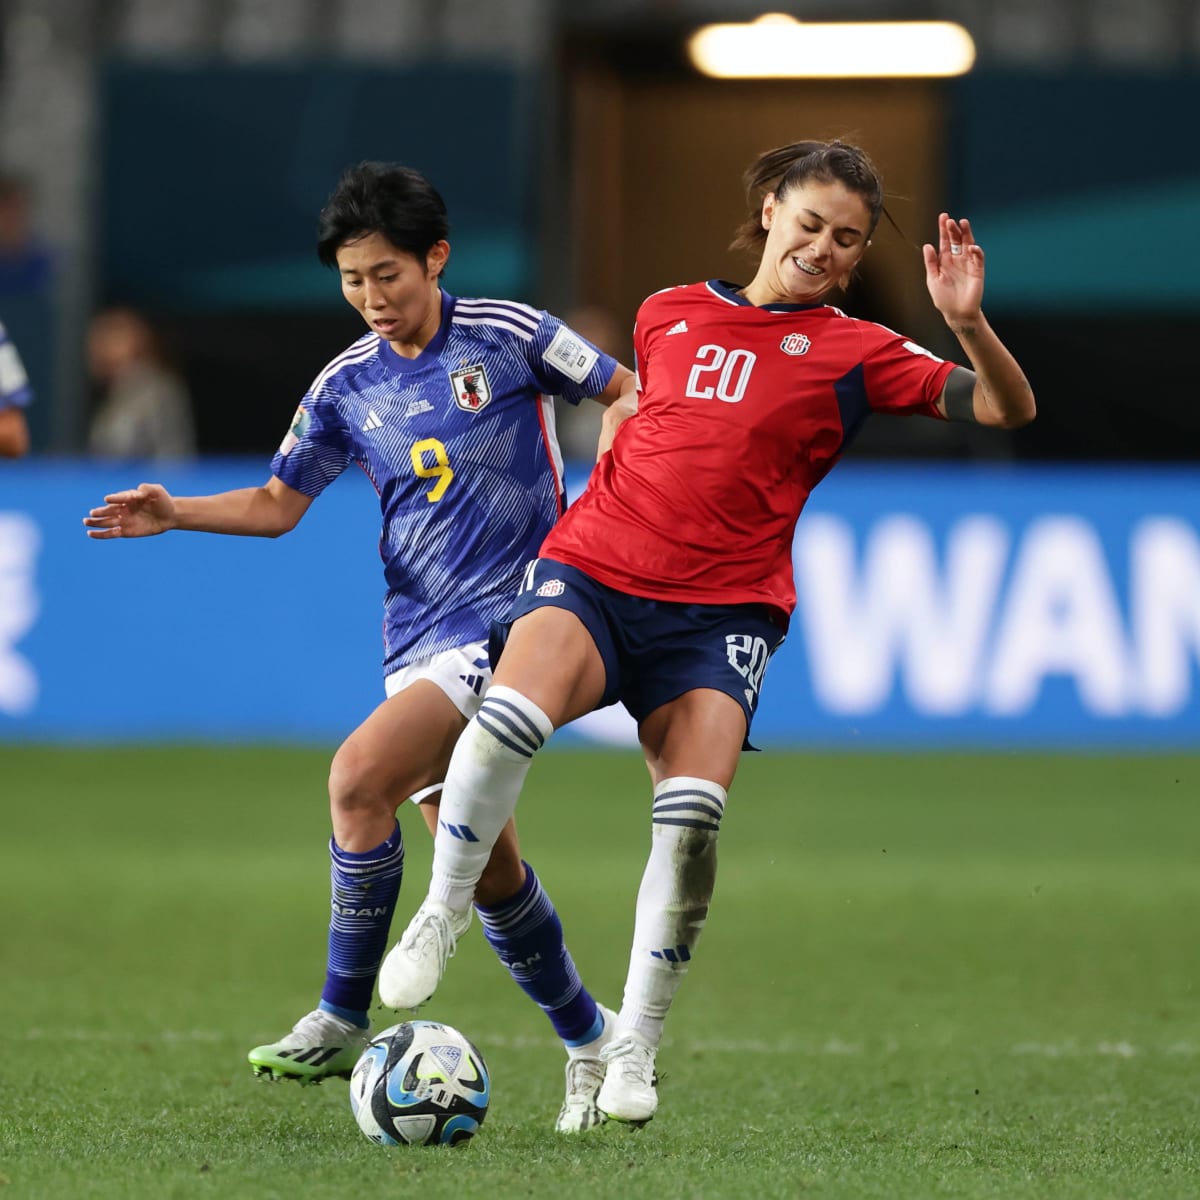 Watch Costa Rica vs Zambia Stream FIFA Womens World Cup live - How to Watch and Stream Major League and College Sports